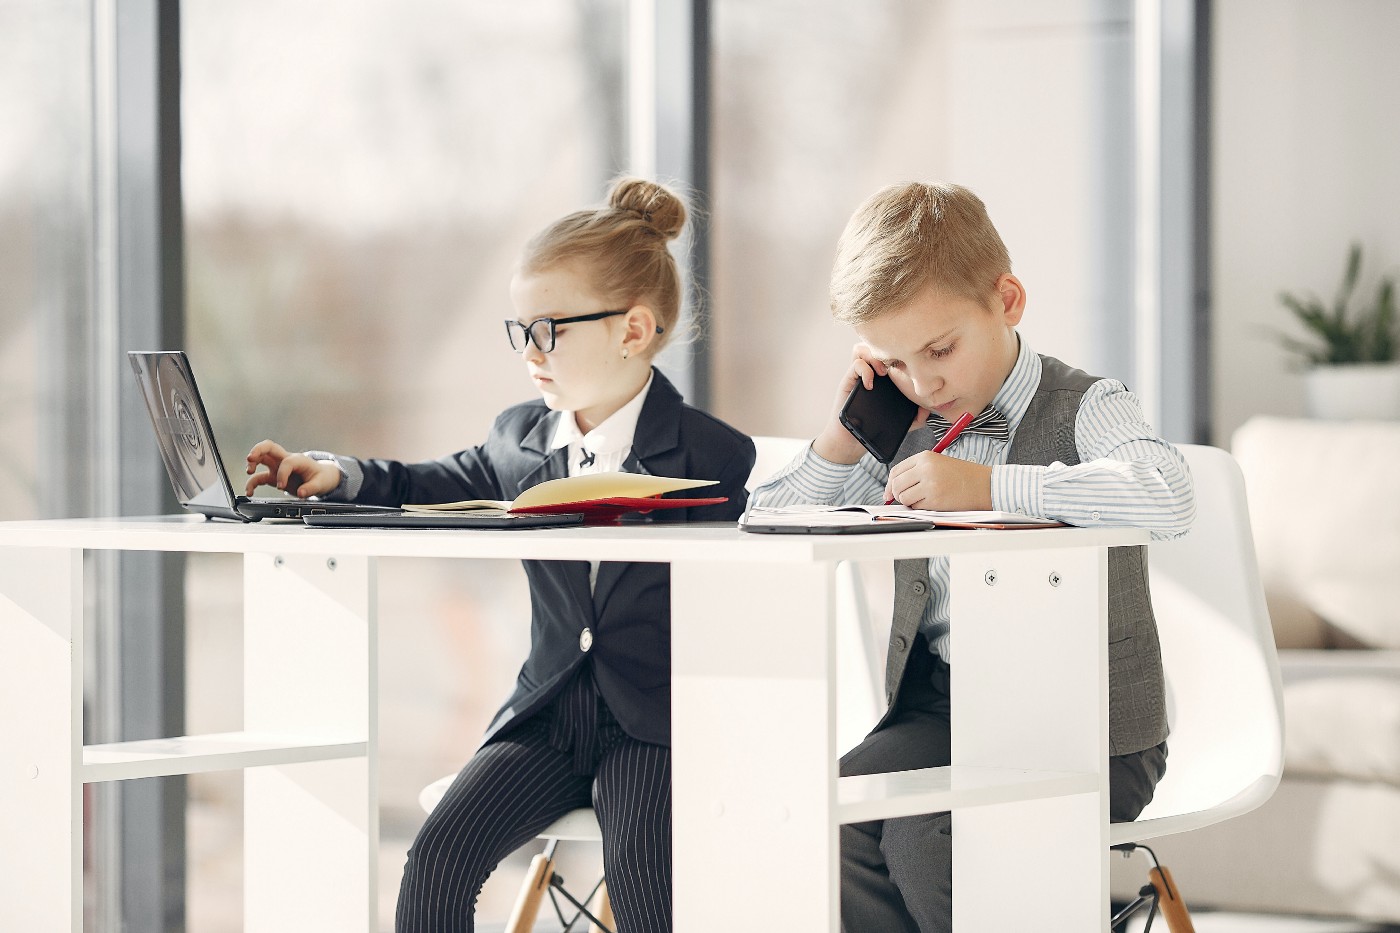 kids dressed like business people and working at a desk on computer and phone